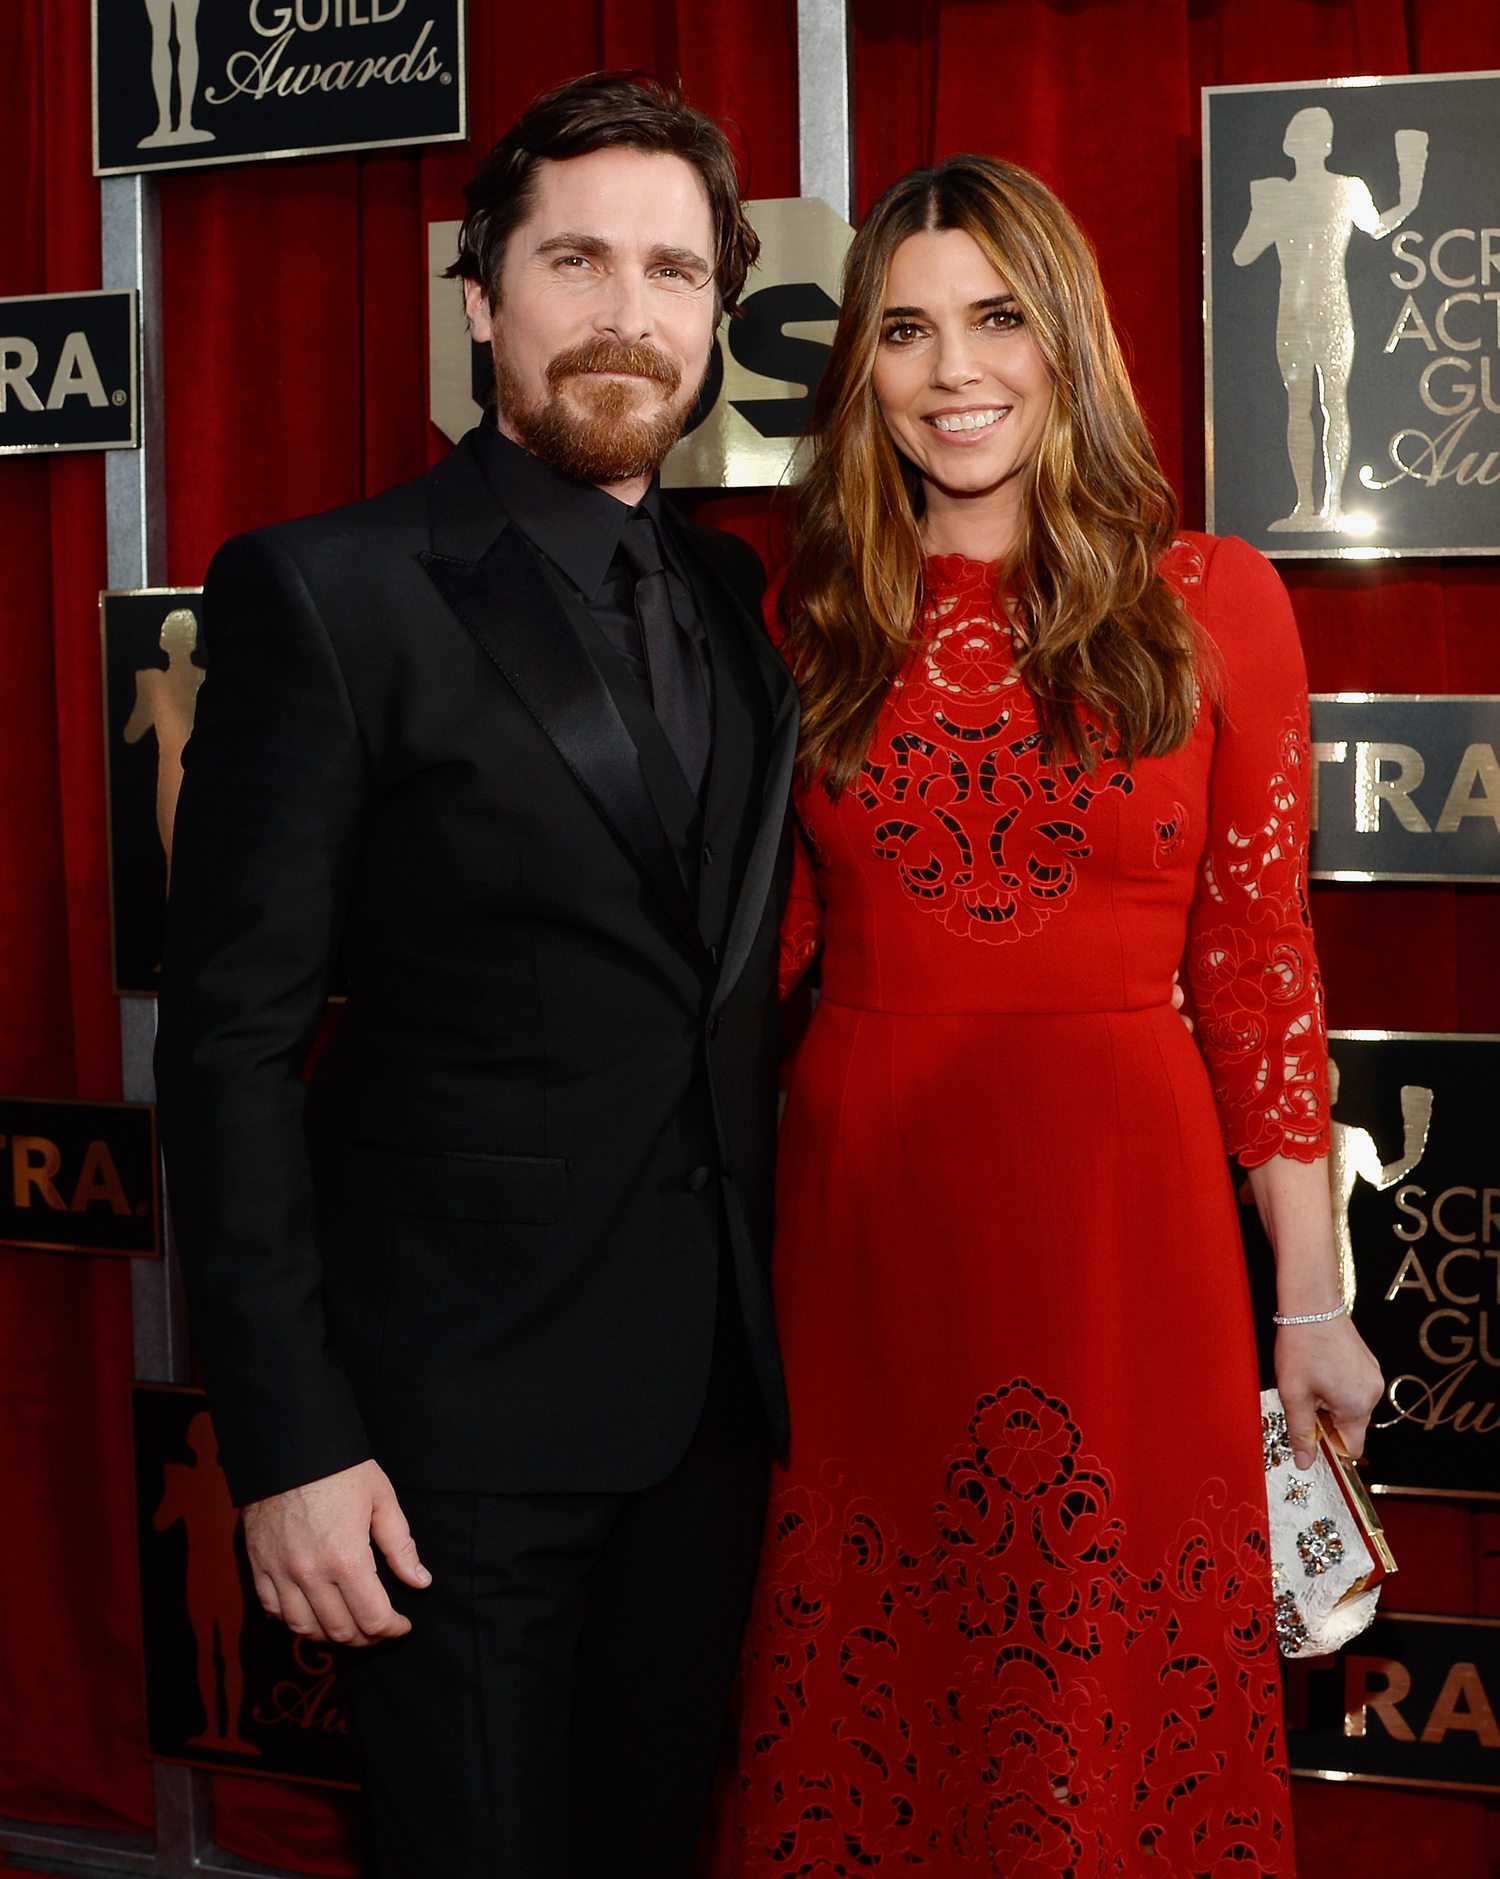 Christian Bale attendse Annual Screen Actors Guild Awards